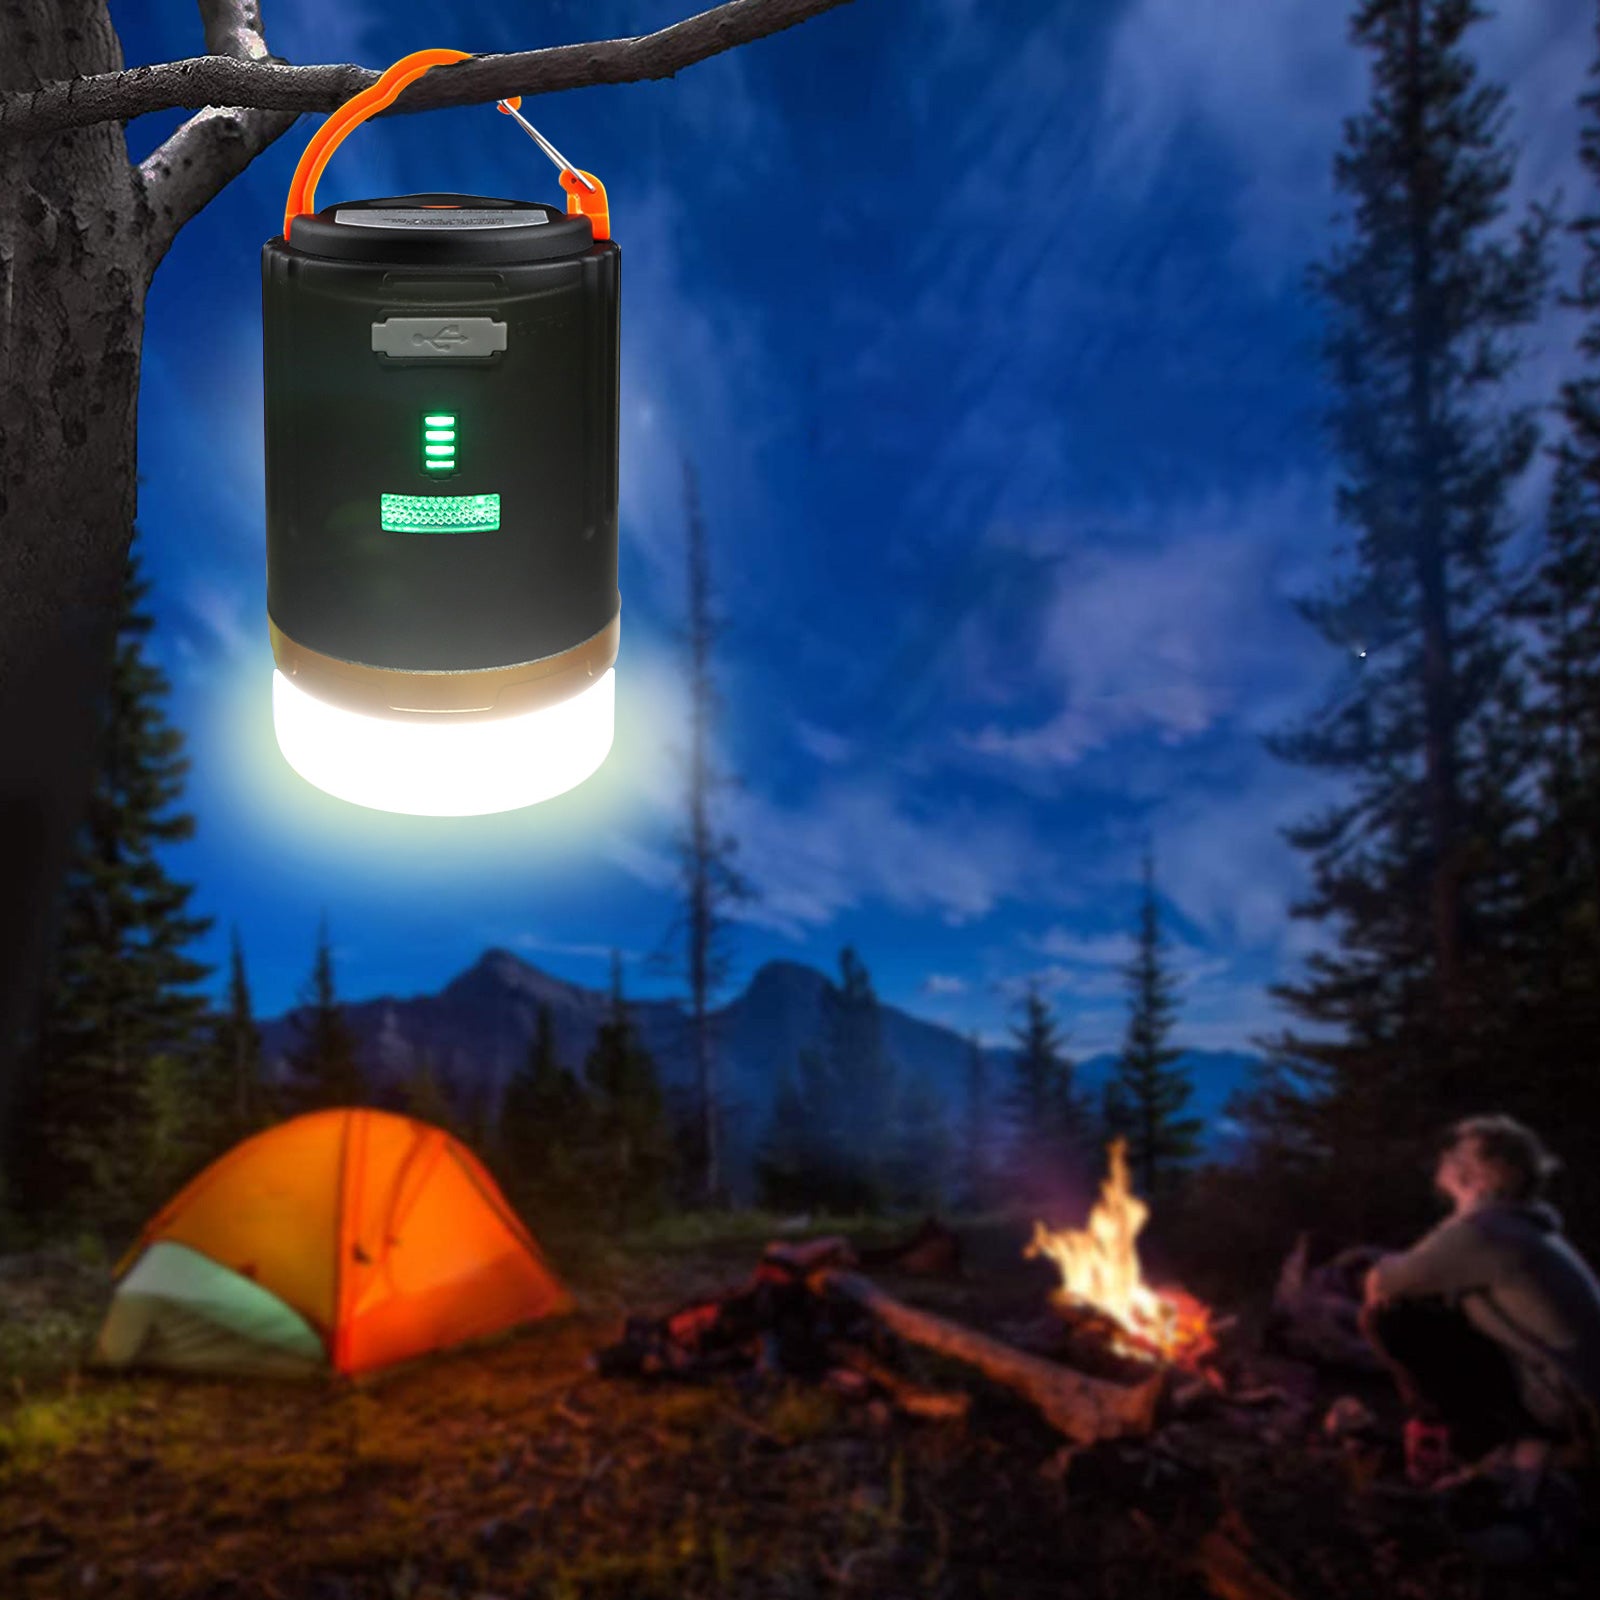 LED Camping Lights USB Rechargeable Emergency Power Bank 3 Light Modes with Waterproof Remote Magnet Base Tent Lights for Camping Outdoor Hurricane Outage Hiking